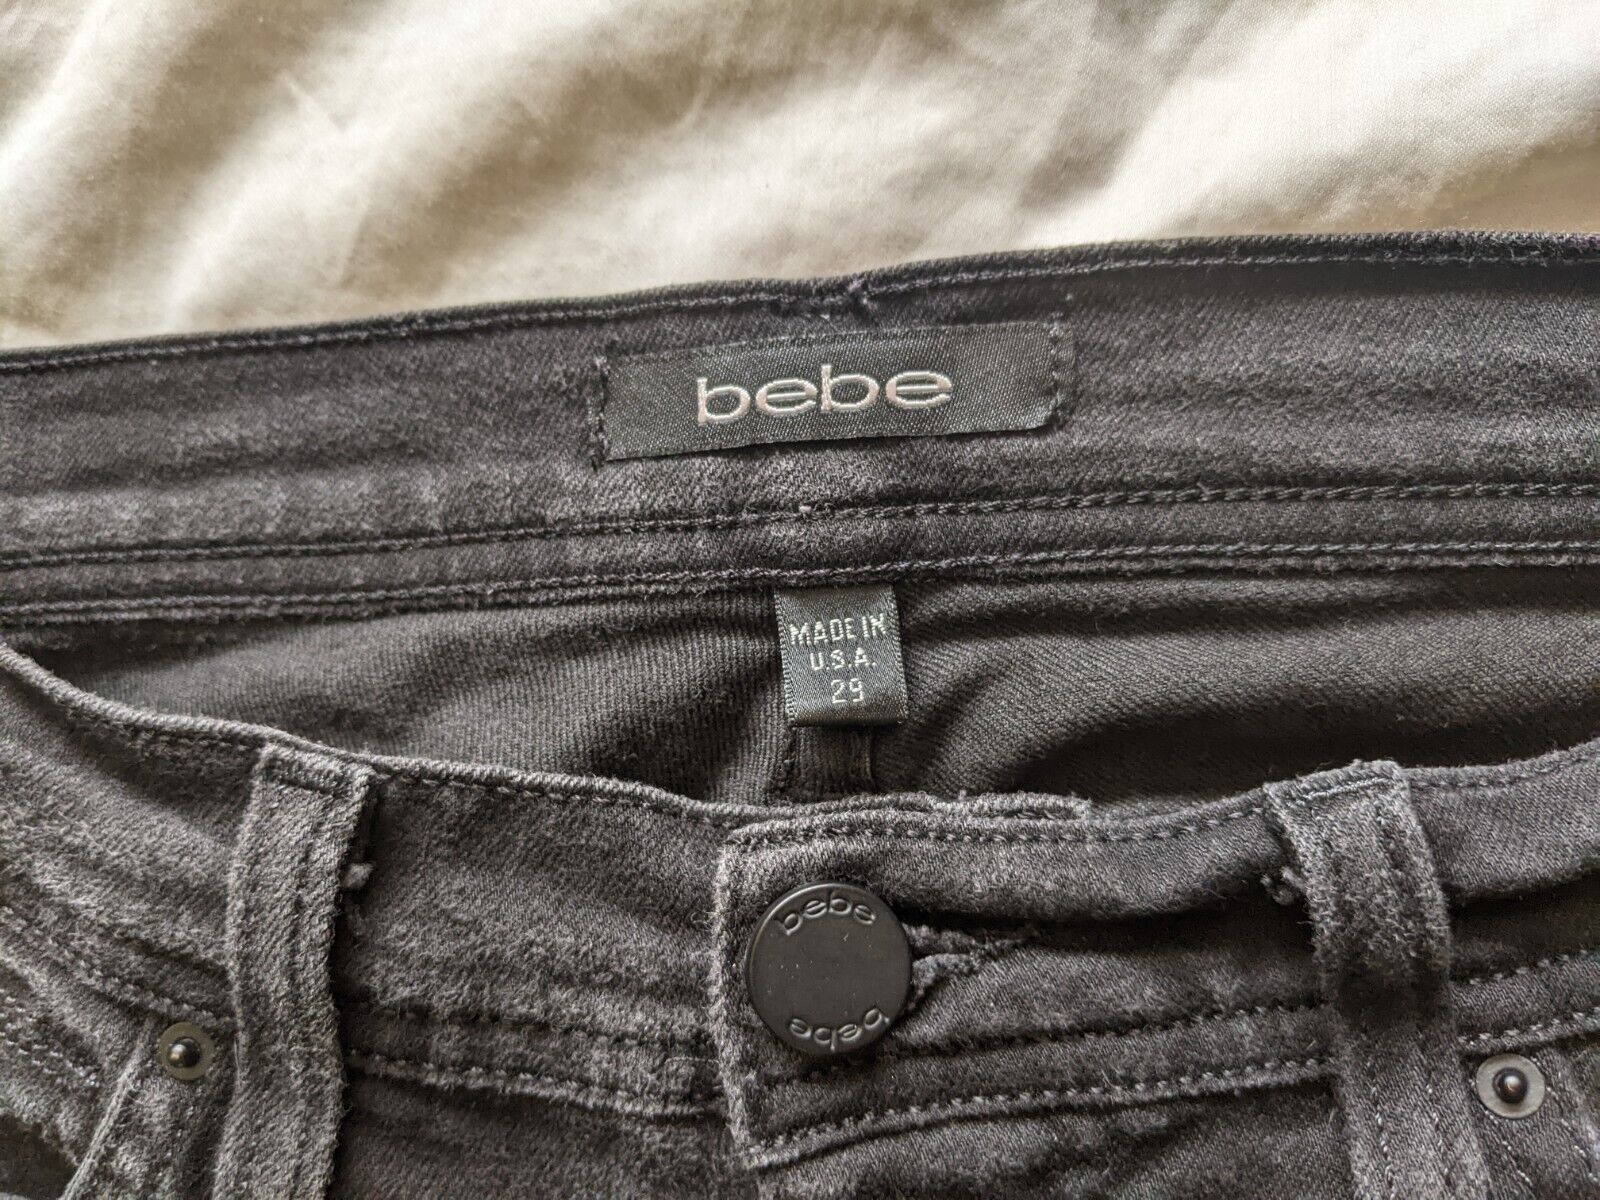 BEBE JEANS FOR WOMEN -PREOWNED- SIZE 29 - BLACK - image 10